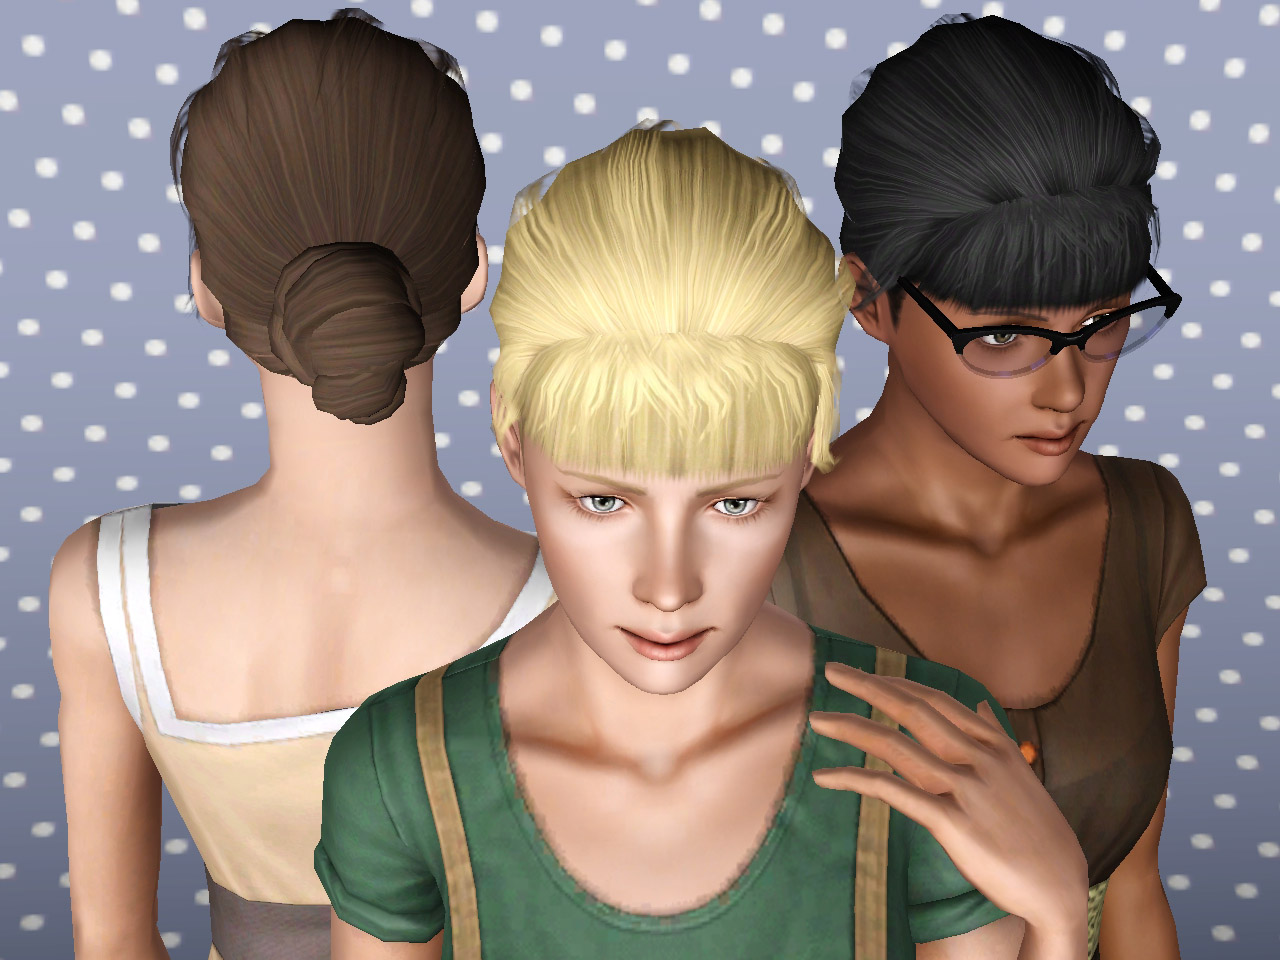 the sims 3 tumblr mods